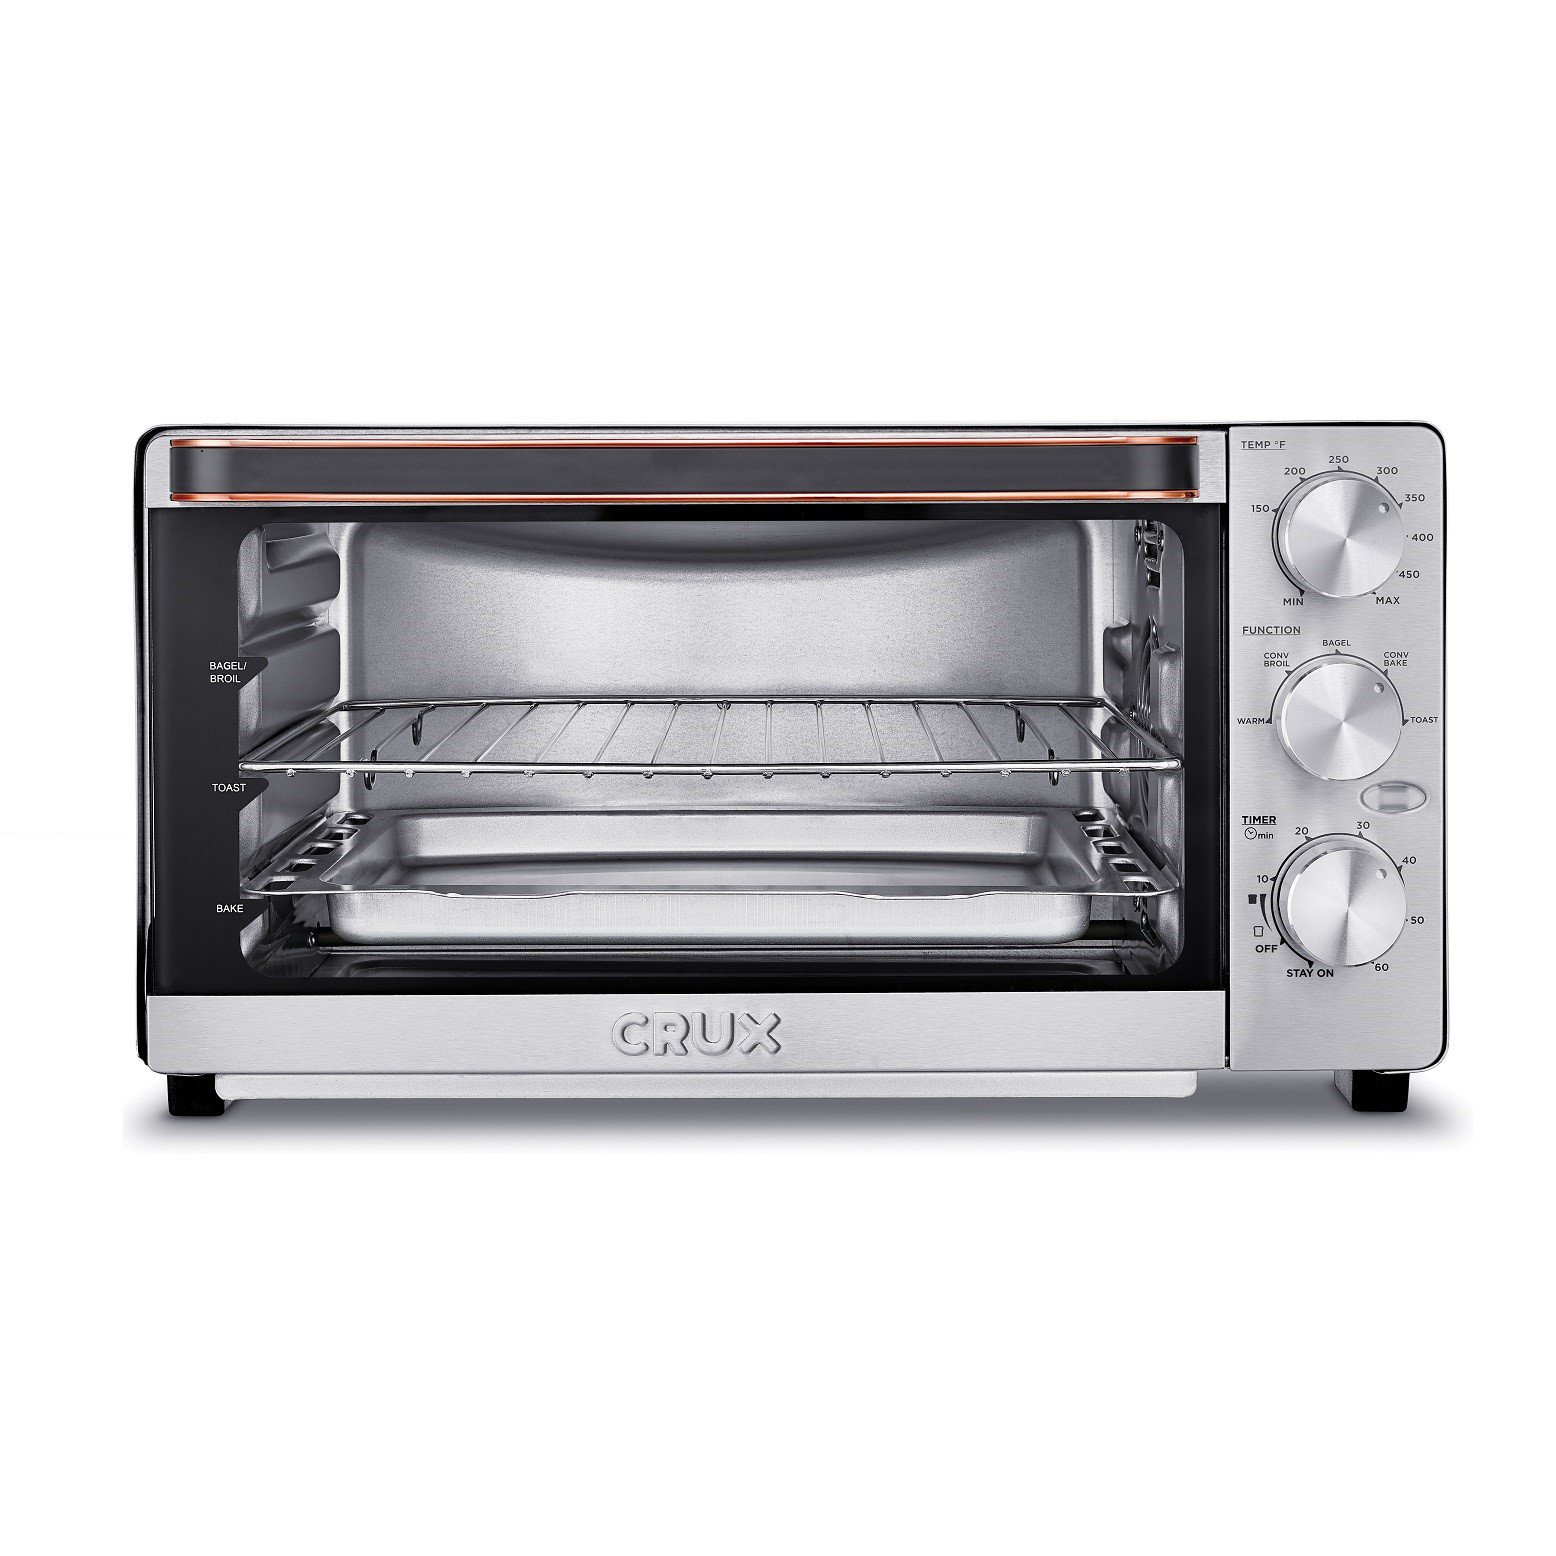 6-Slice Countertop Rotisserie Toaster Oven - fits a 12” pizza 23L capacity  (Black)